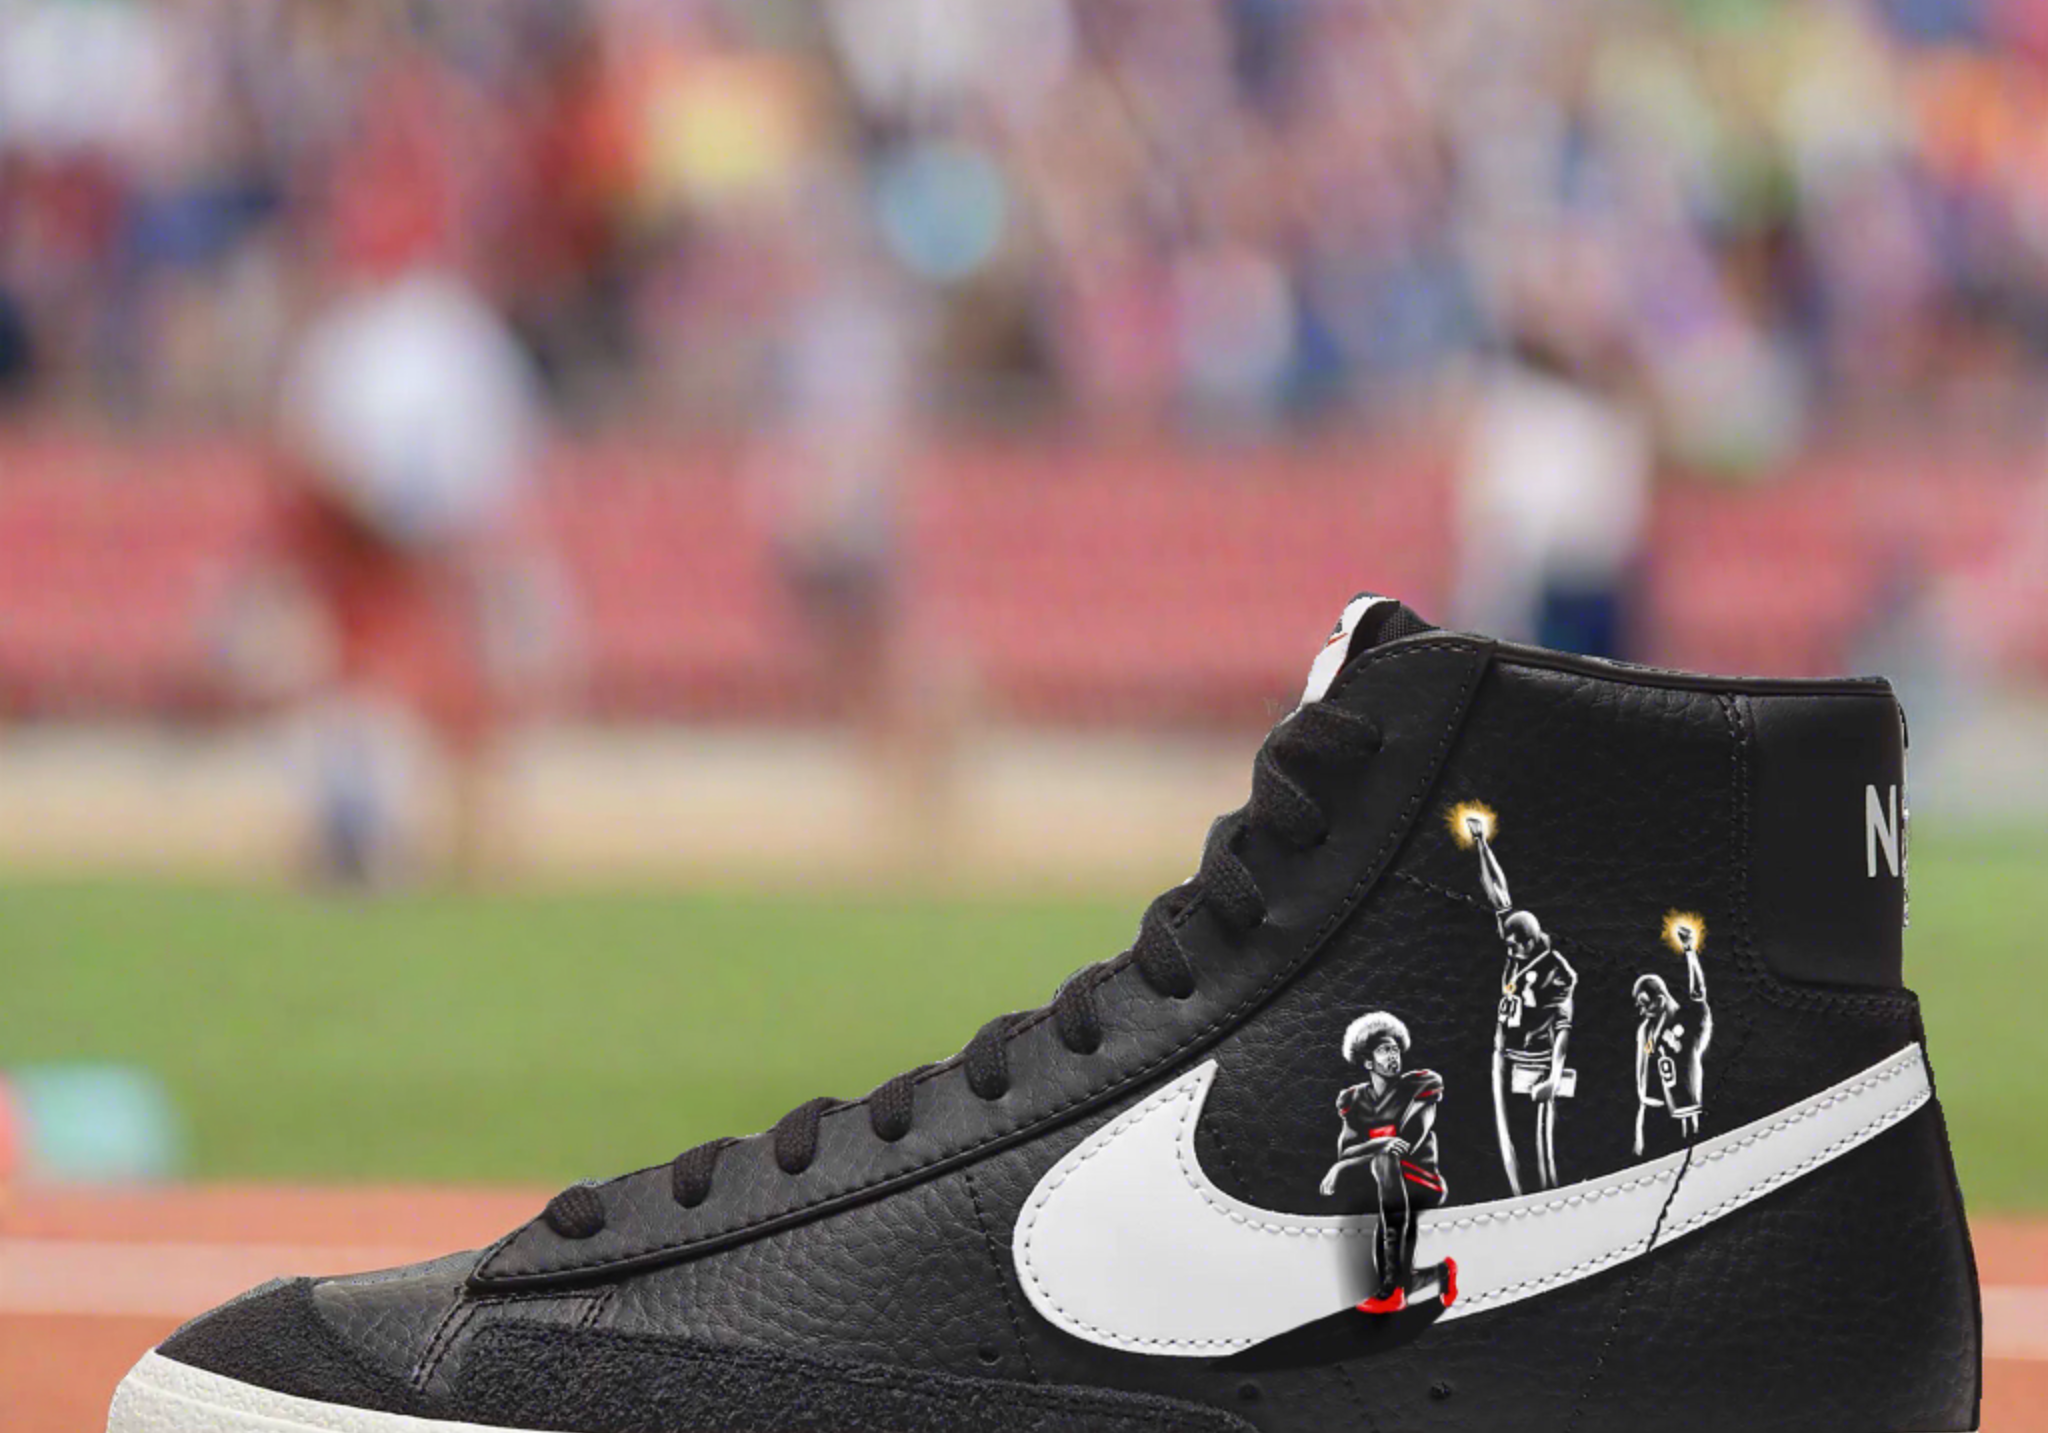 Nike Blazer Mid Sneakers | Black and White | "I'm With Kap" - Androo's Art